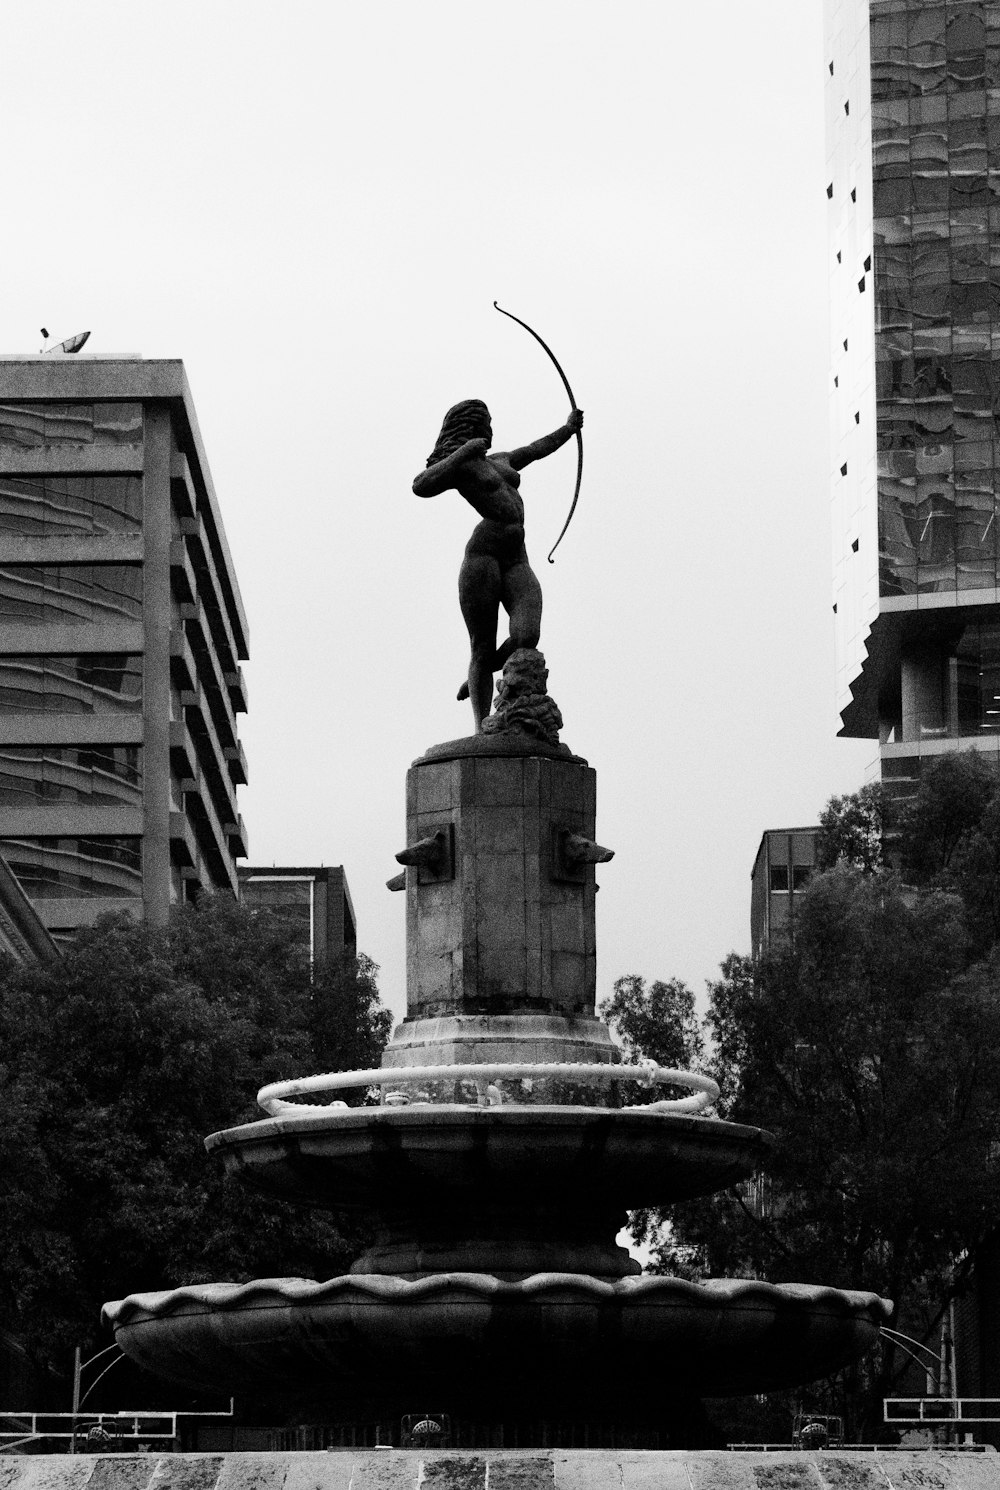 a statue of a person holding a spear in a fountain